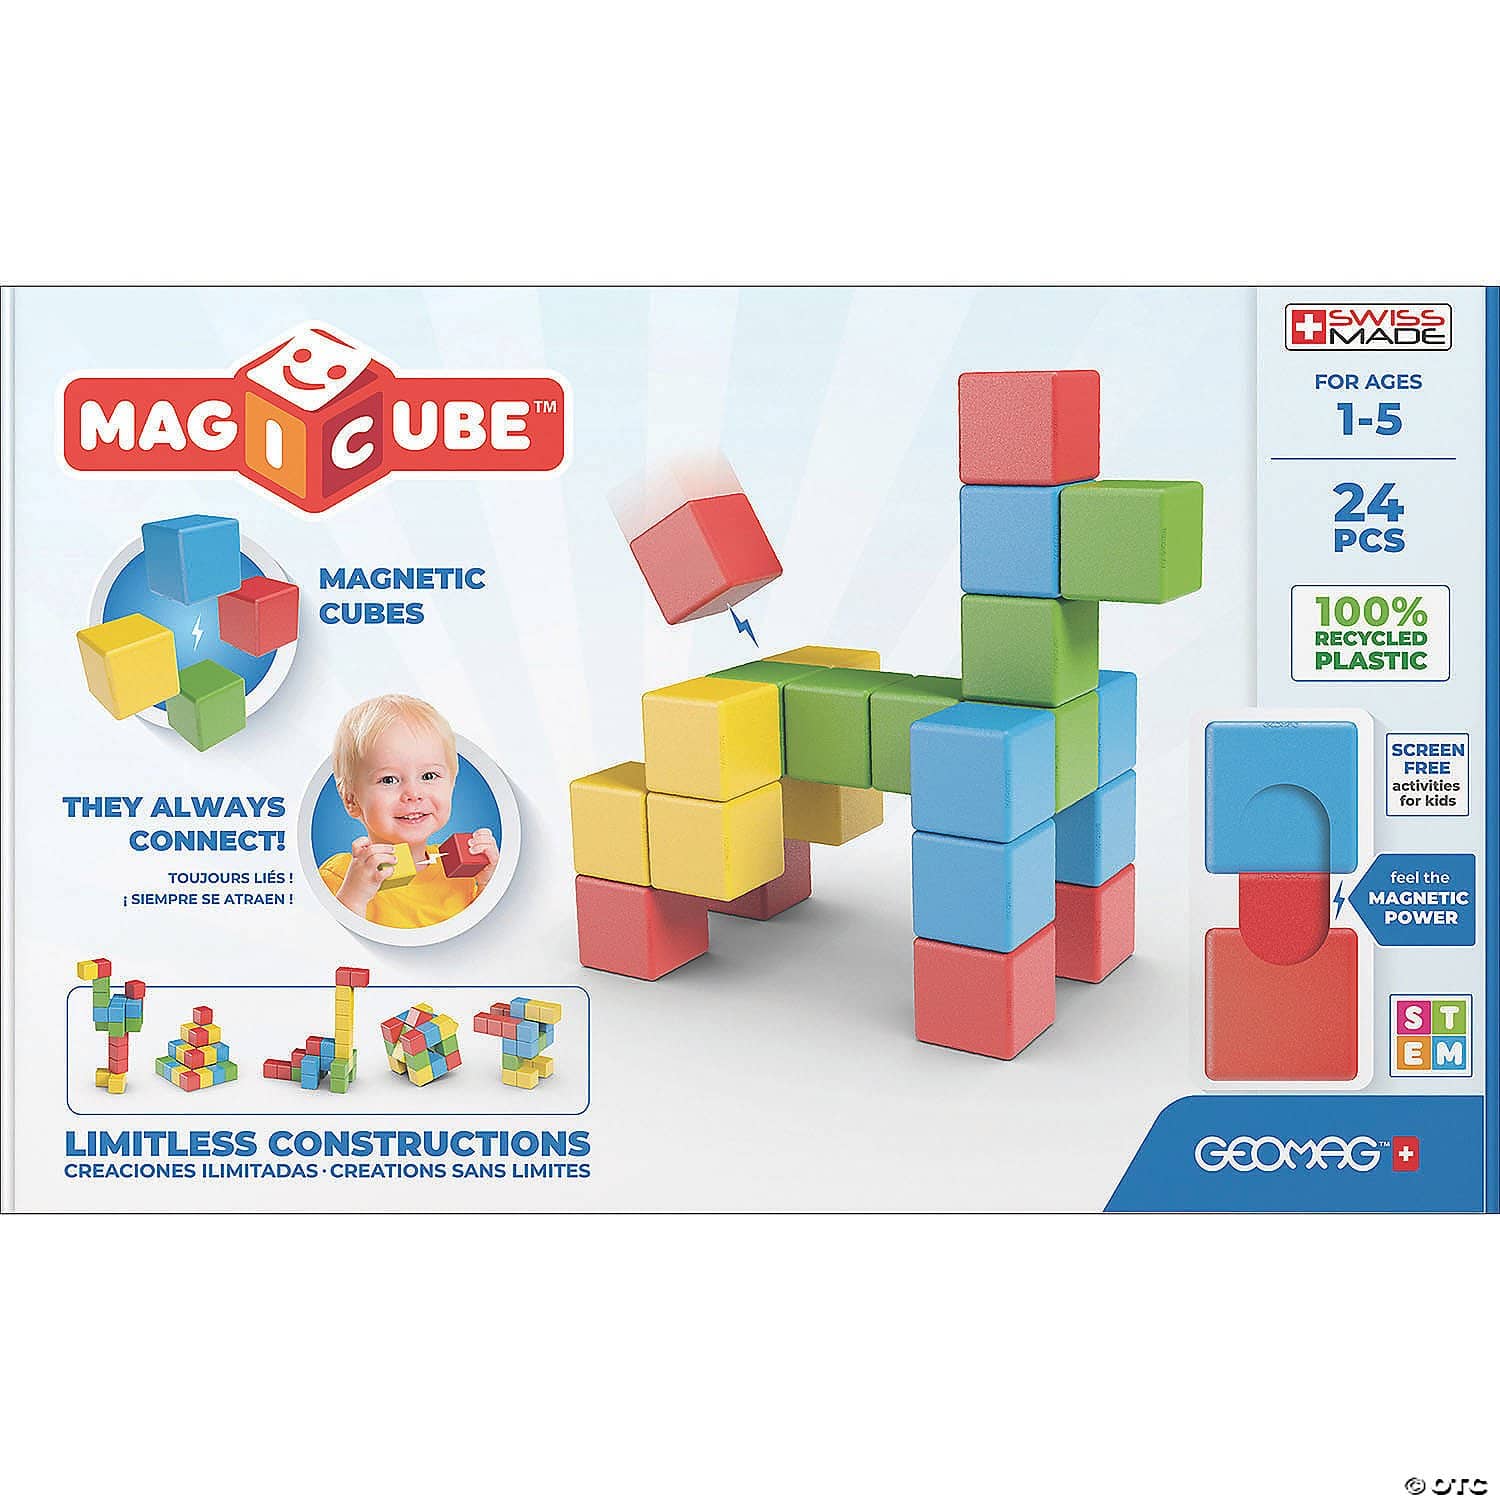 Babys First Basic Block Set - 12 Colorful Wooden Cubes (Made In German –  Kidding Around NYC